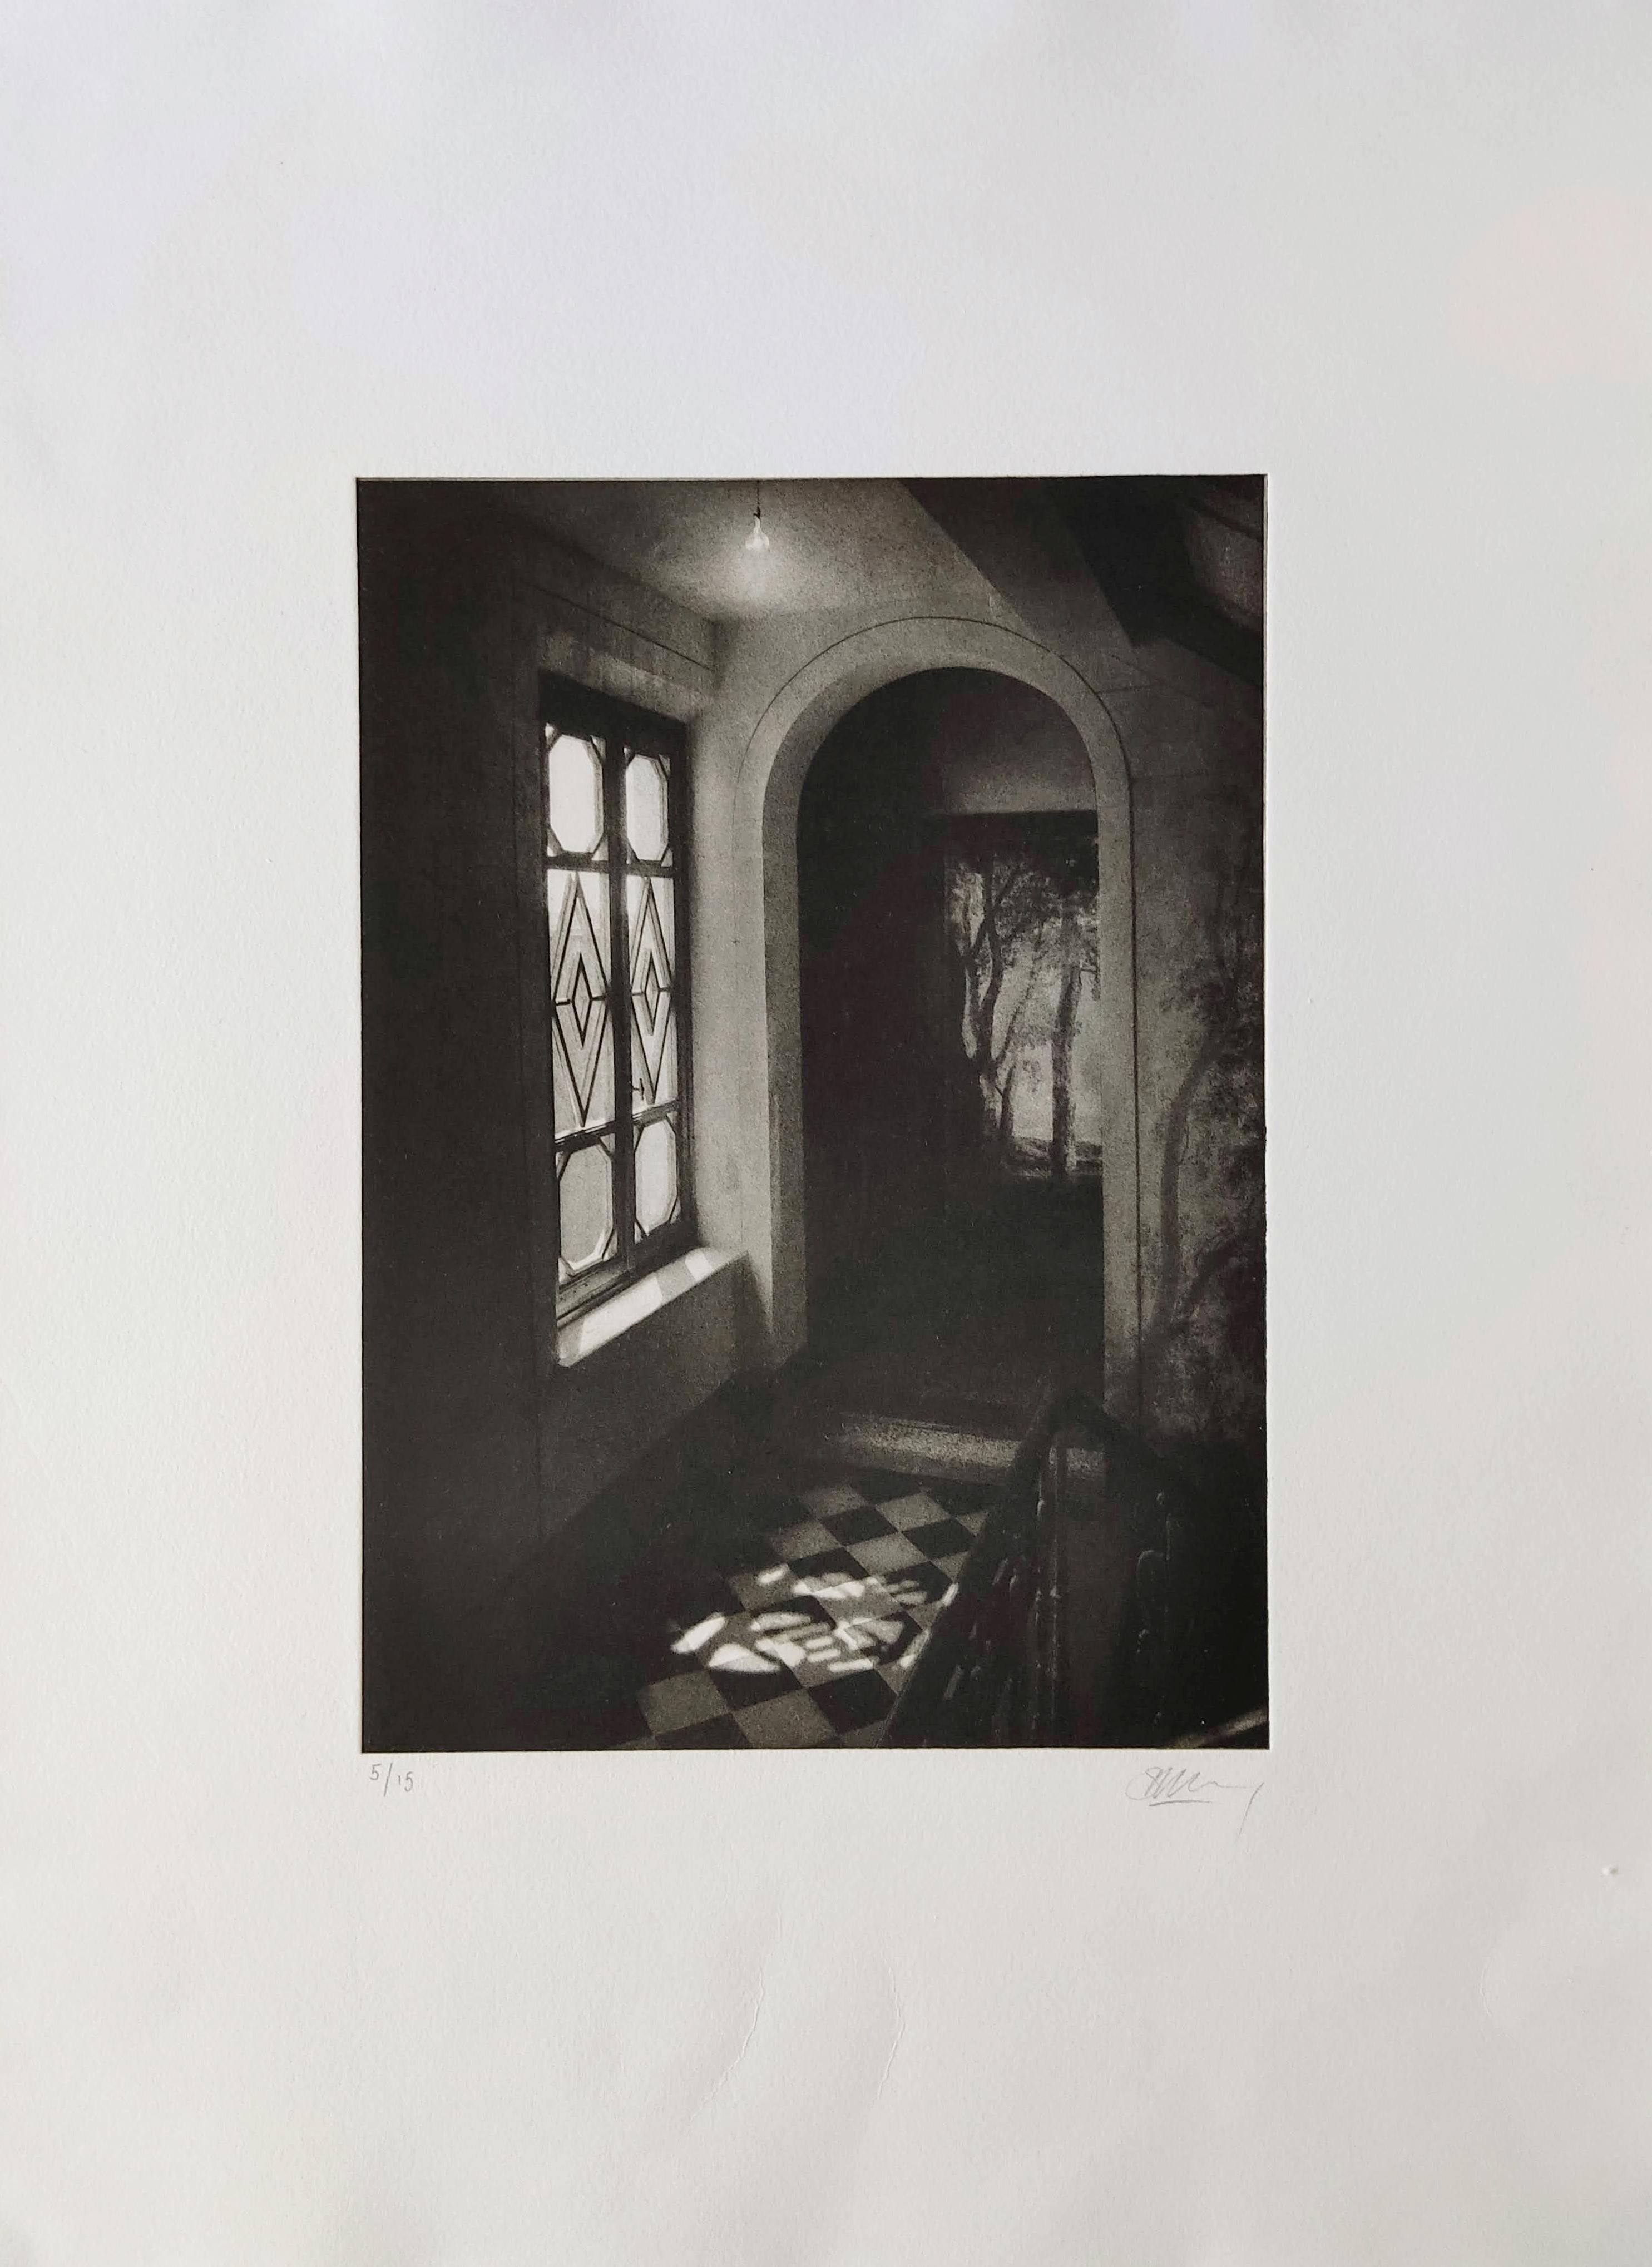 Photopolymer Photogravure Etching on Fine Art paper. Interior Photography, Abandoned place, Urbex, Nature.
Work Title : 